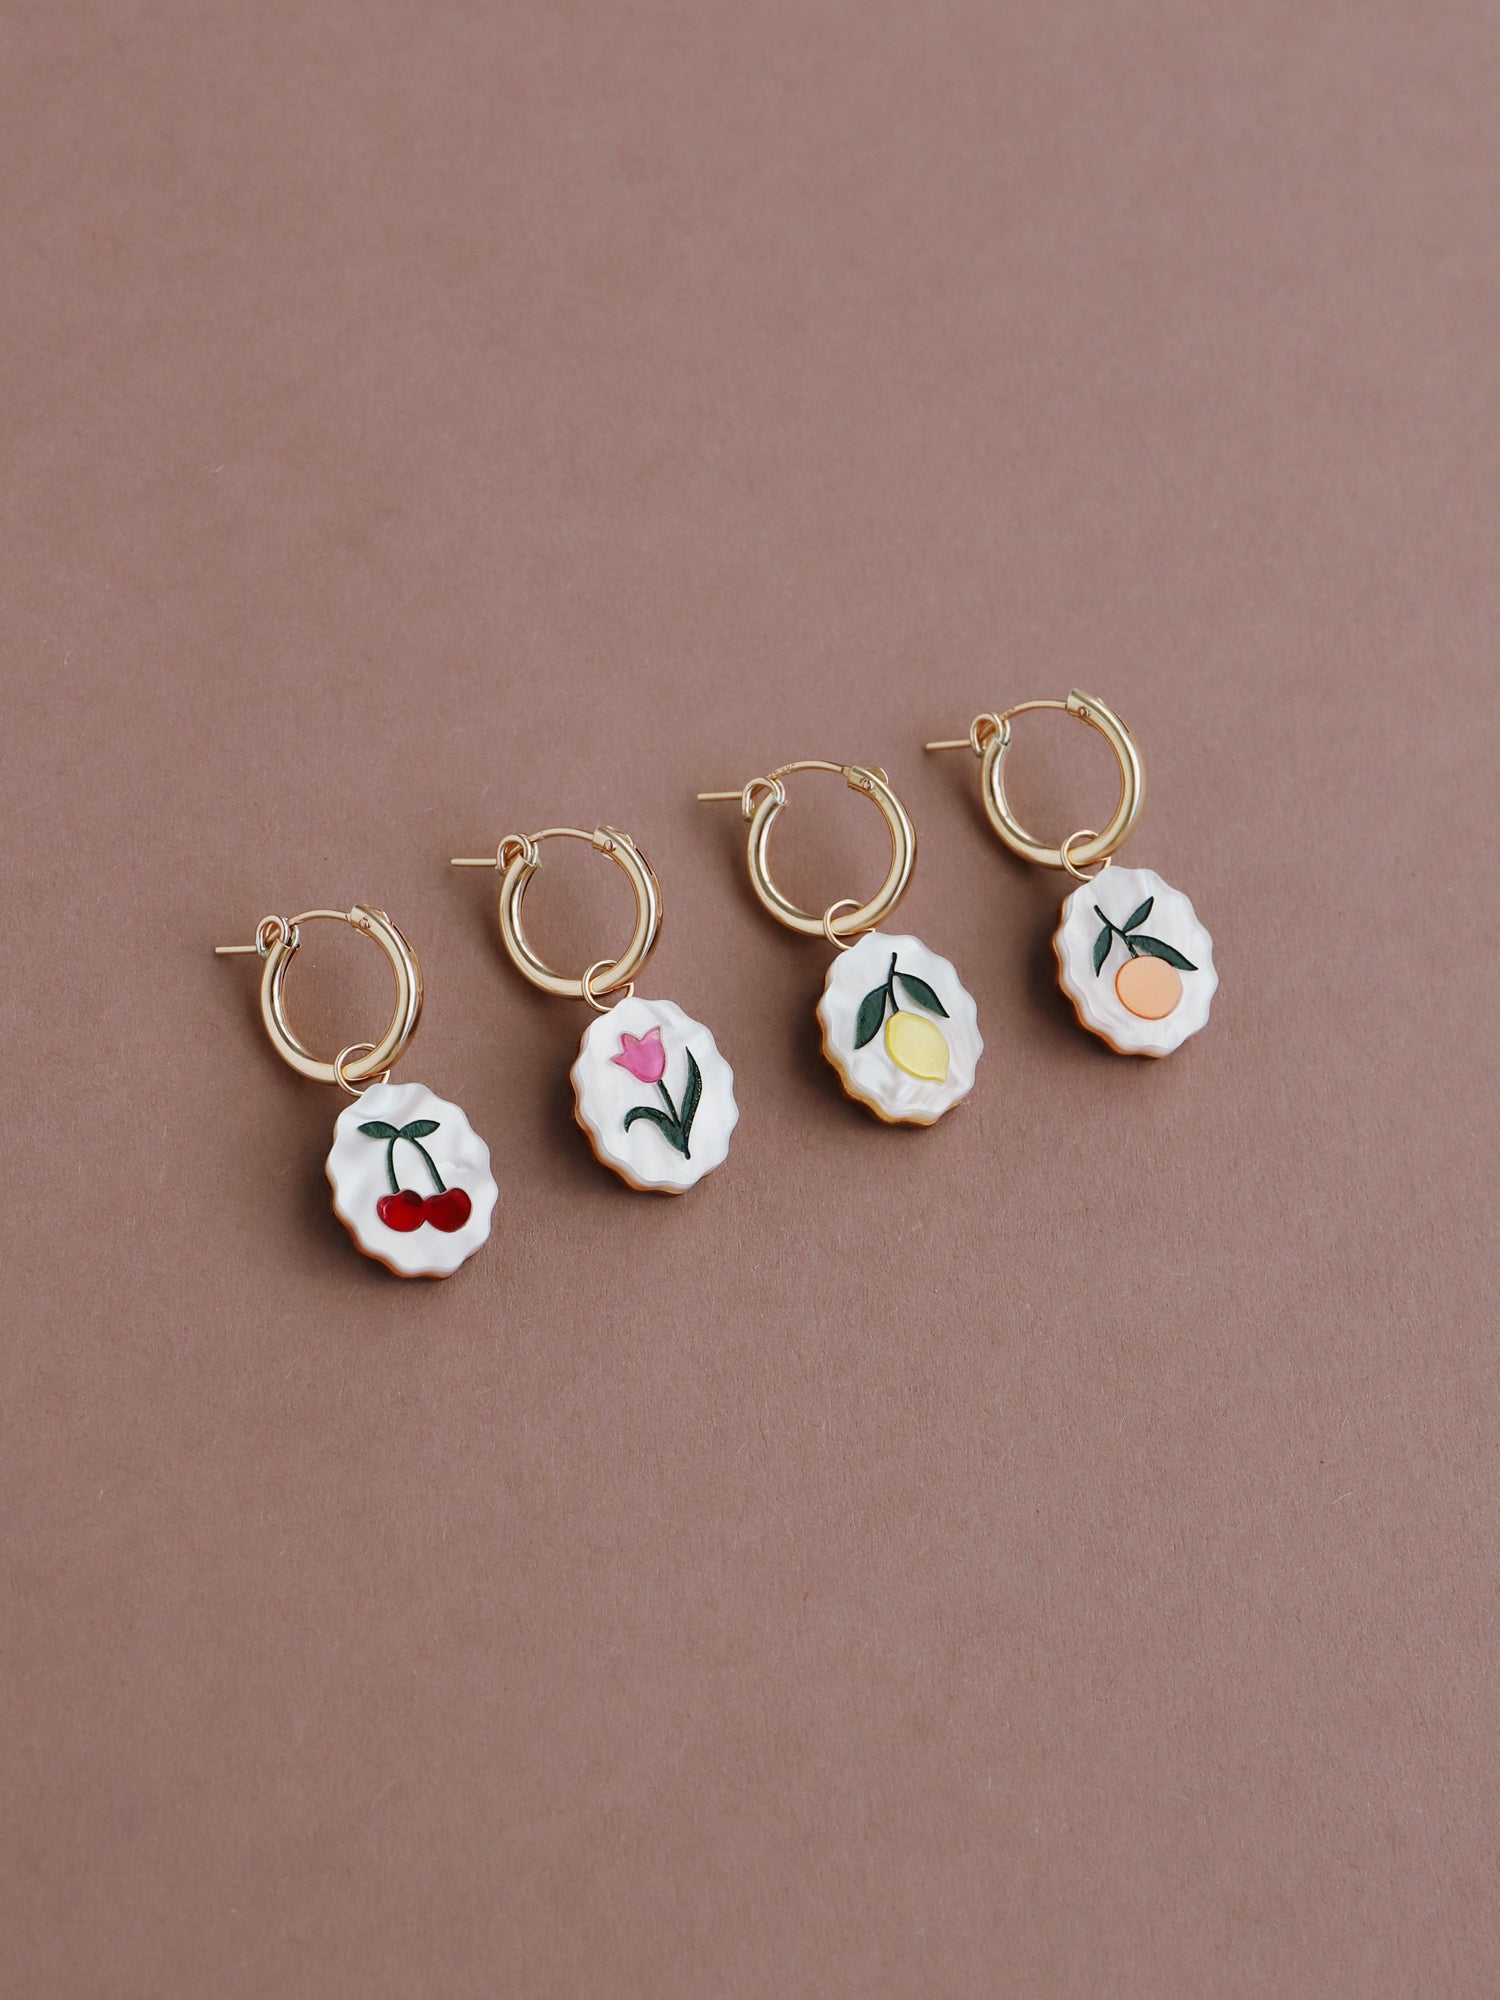 Lemon, cherry, tulip & orange mix n’ match charm hoop earrings. Made from acrylic and 14k gold-filled hoops & findings. Handmade in the UK by Wolf & Moon.